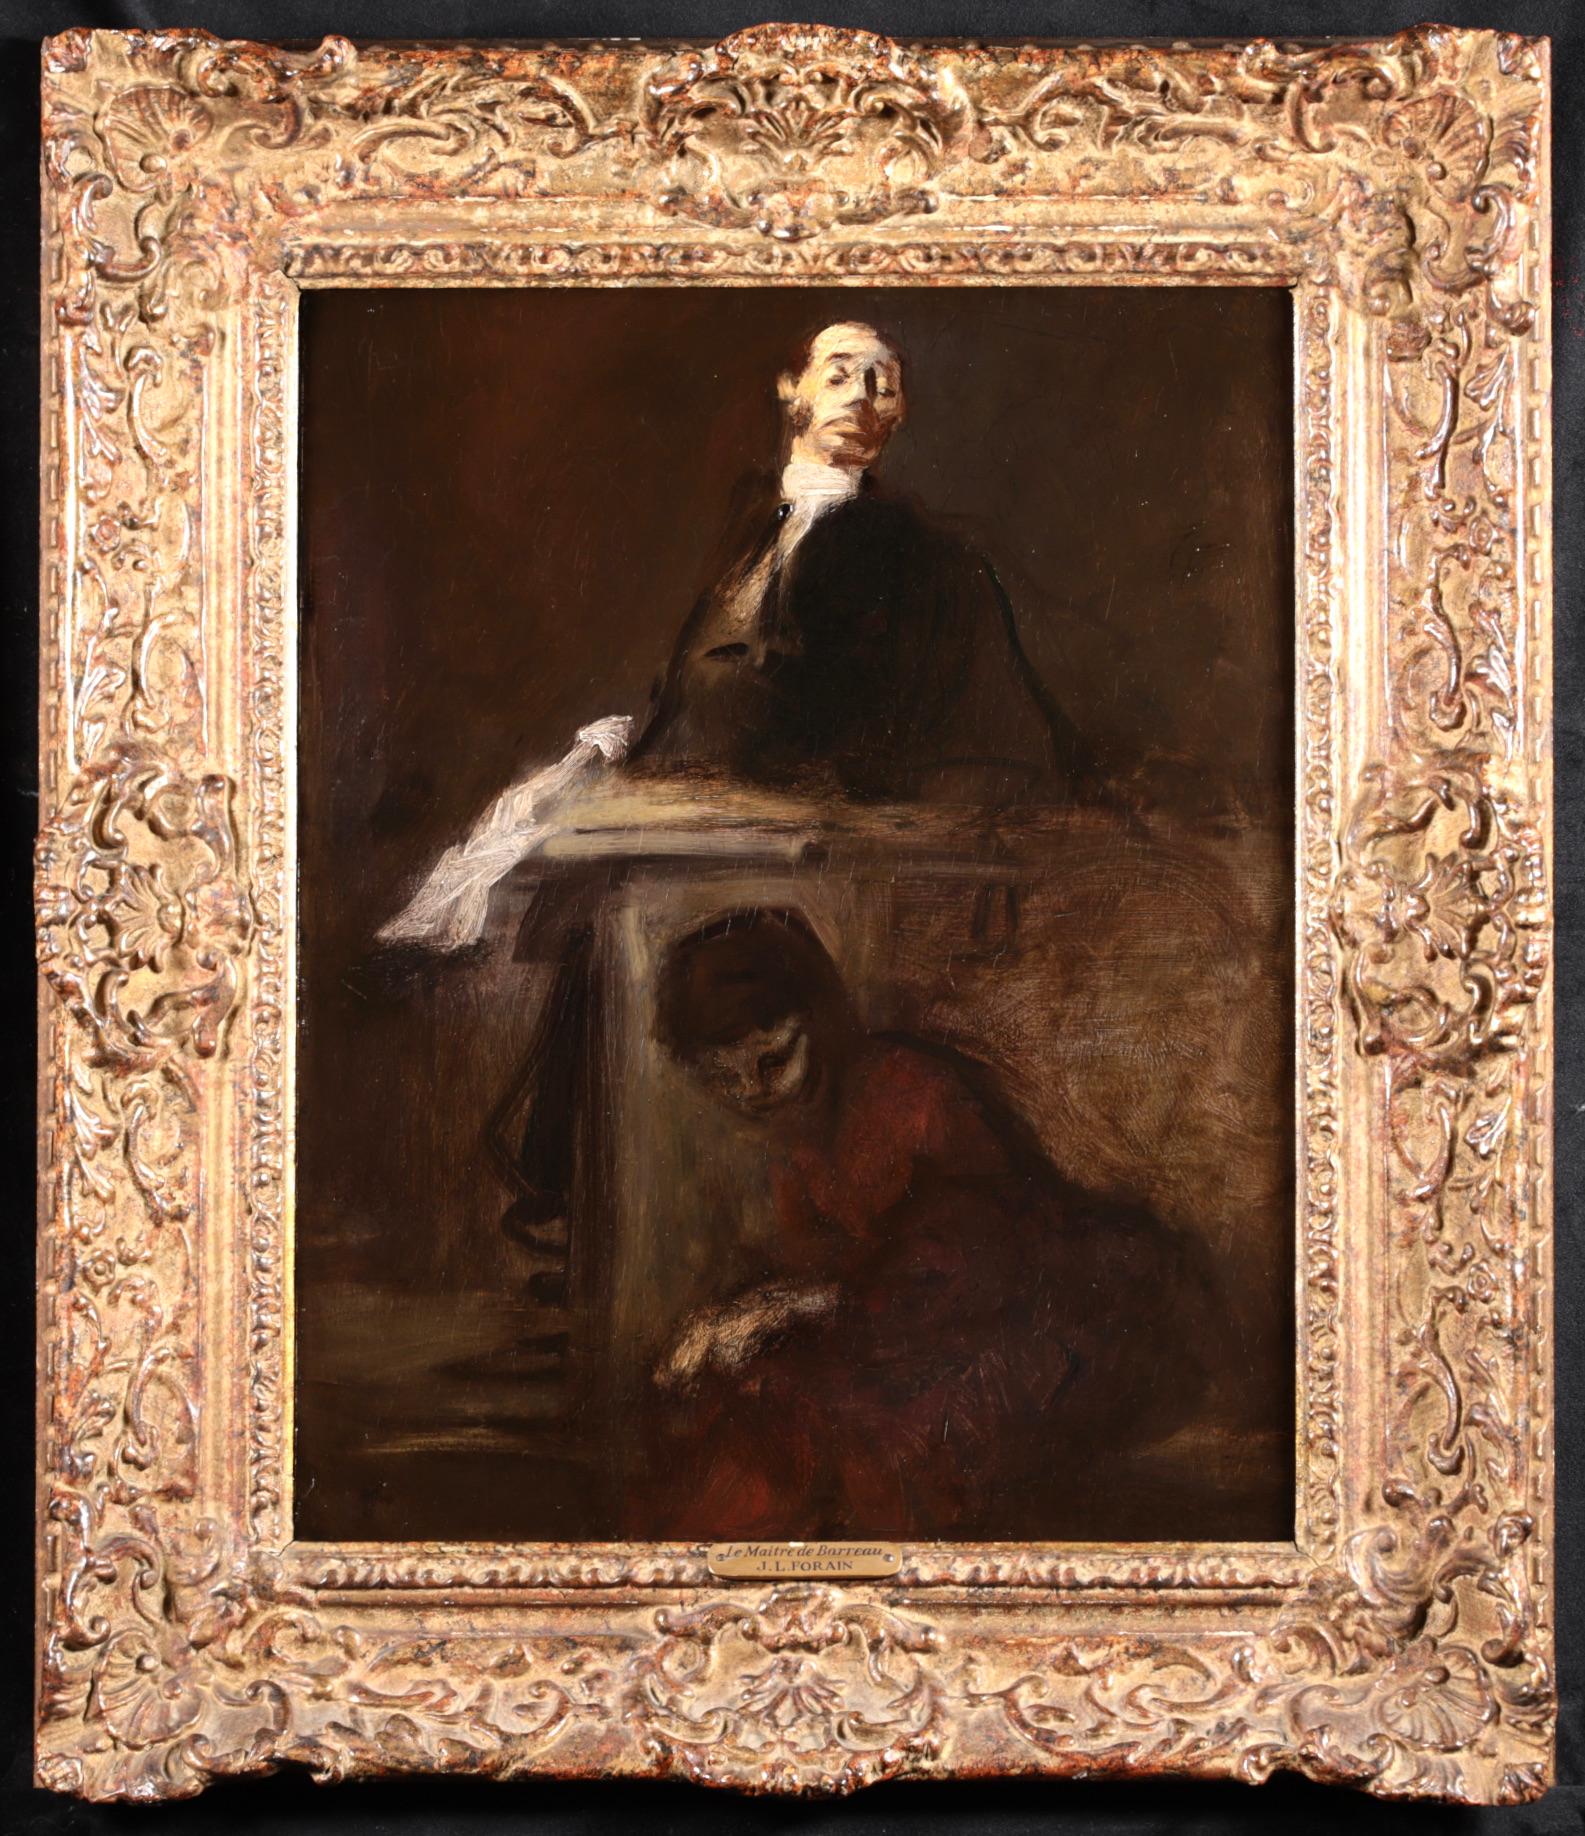 Monogramed impressionist oil on panel portrait circa 1890 by sought after French impressionist painter Jean Louis Forain. The subject depicts an arrogant lawyer looking down upon his poor client - a destitute woman seated and clasping her hands in